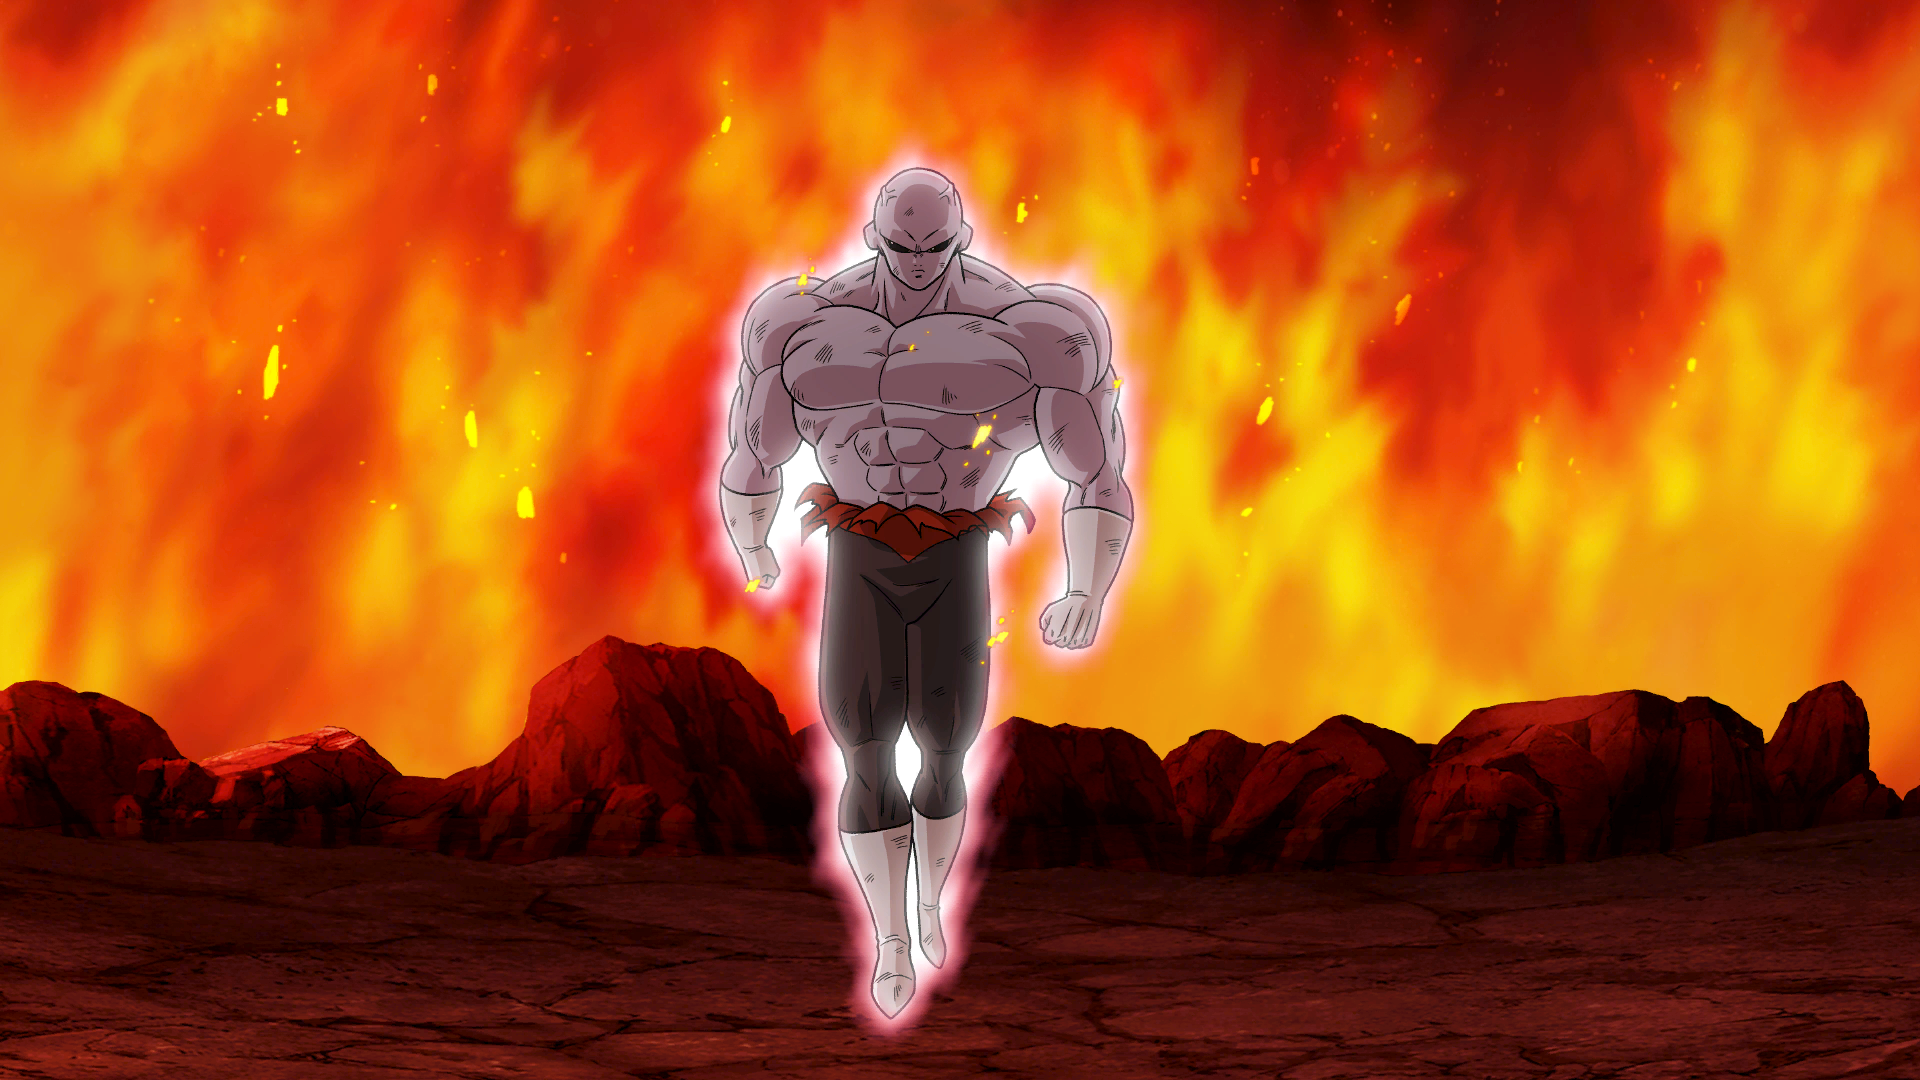 Dragon Ball Super Jiren Muscles Fire Looking At Viewer Shirtless Anime Creatures Gloves 1920x1080